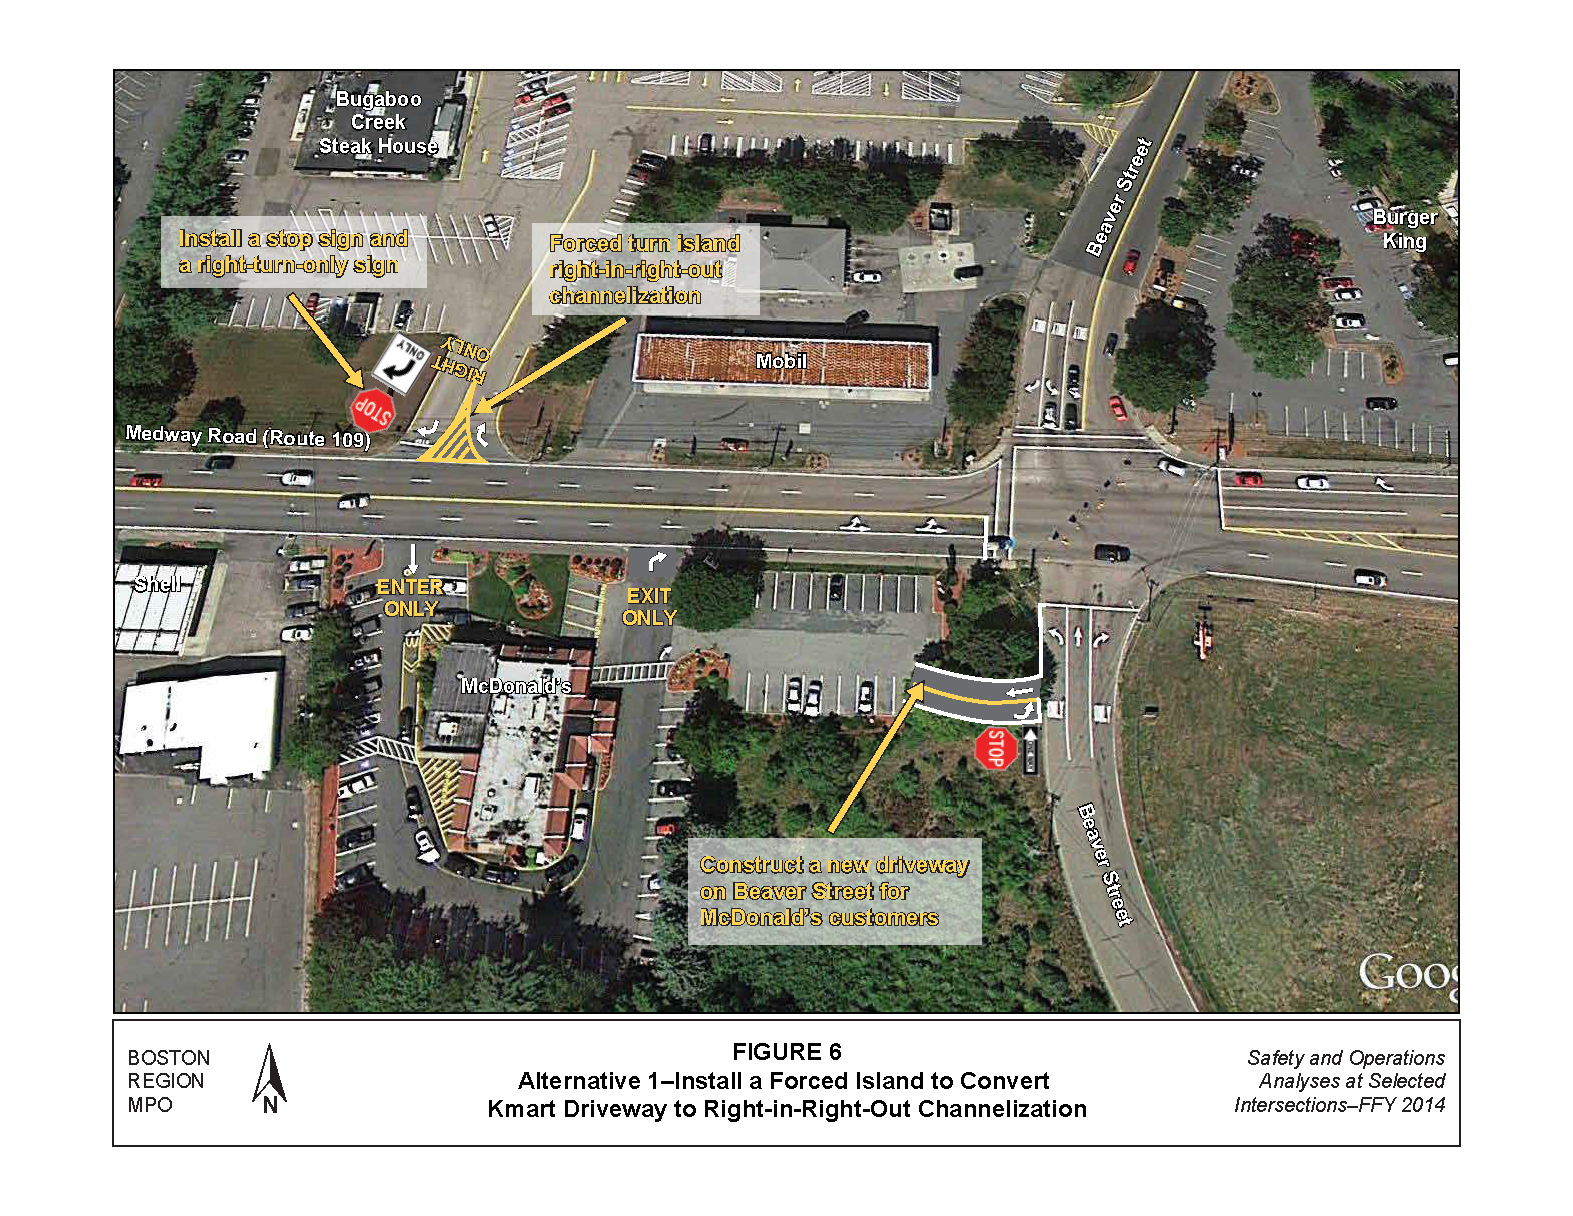 FIGURE 6. Aerial-view map that portrays MPO staff “Improvement Alternative 1,” which recommends right-in-right-out channelization at the Kmart driveway and constructing a new driveway on Beaver Street for McDonald’s customers.